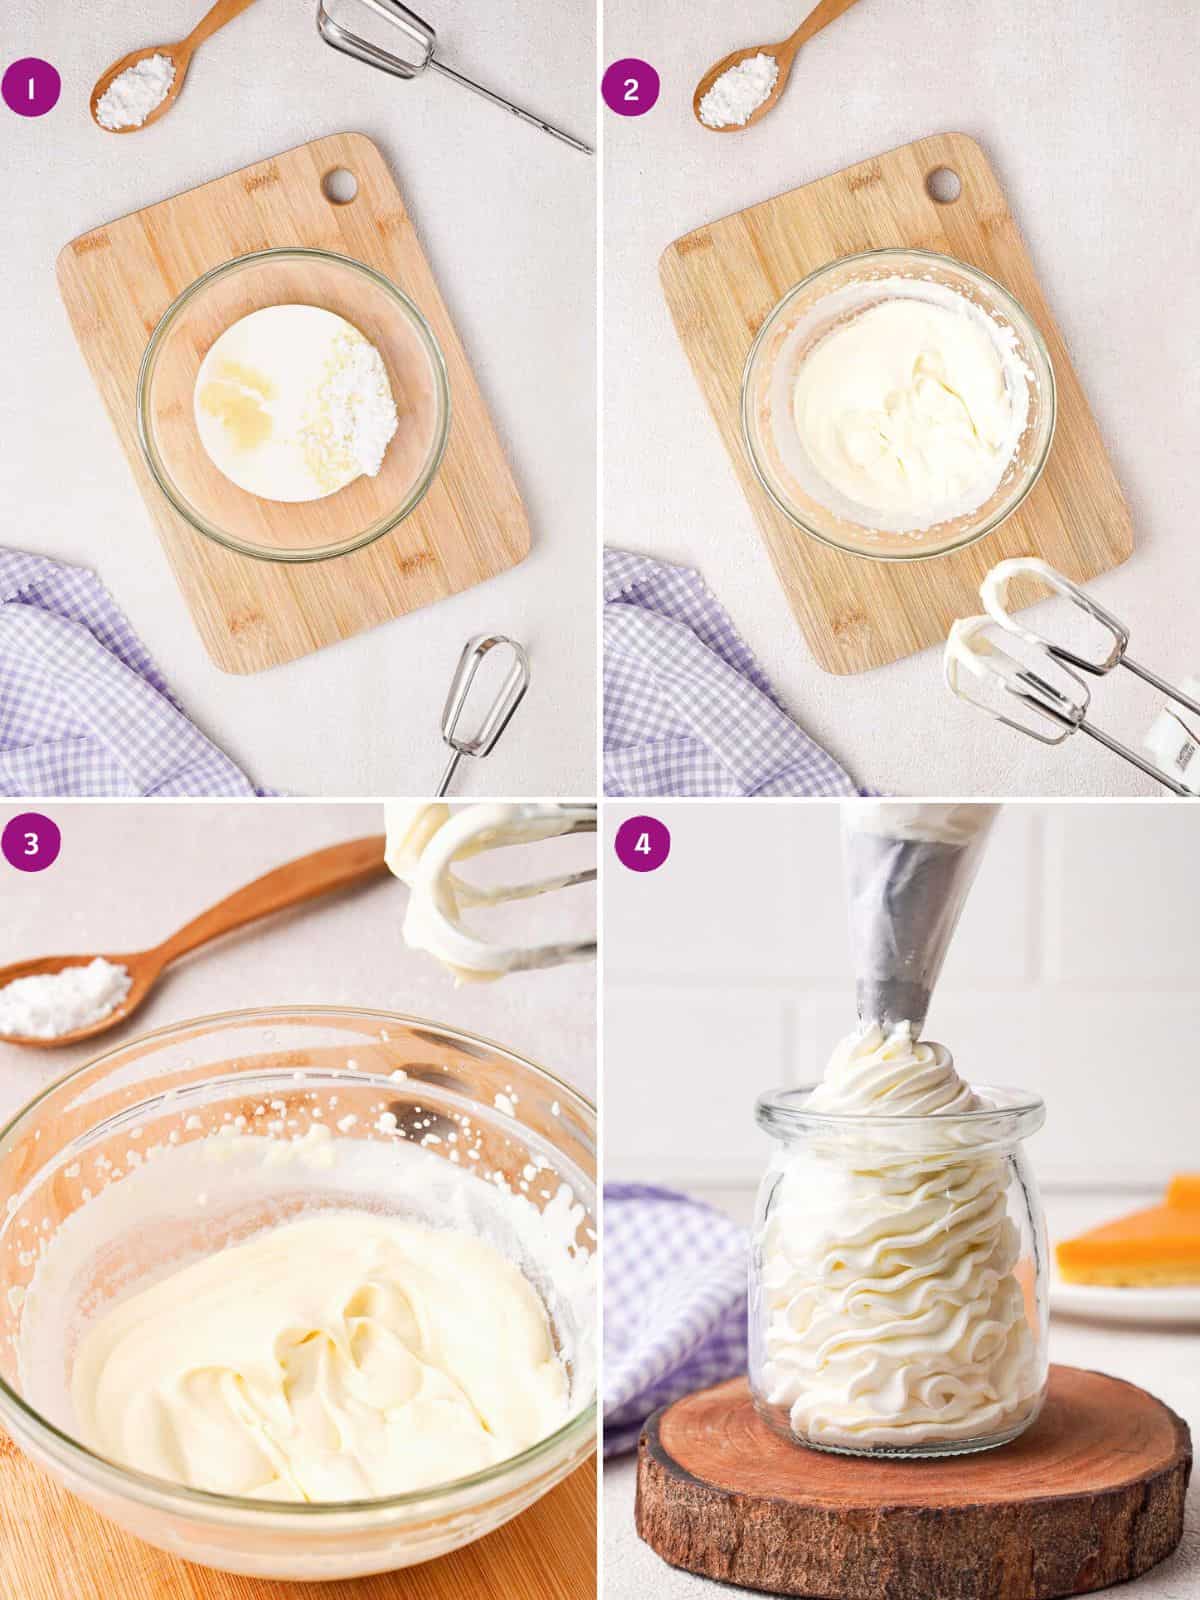 Steps showing how to make a bourbon infused whipped cream.